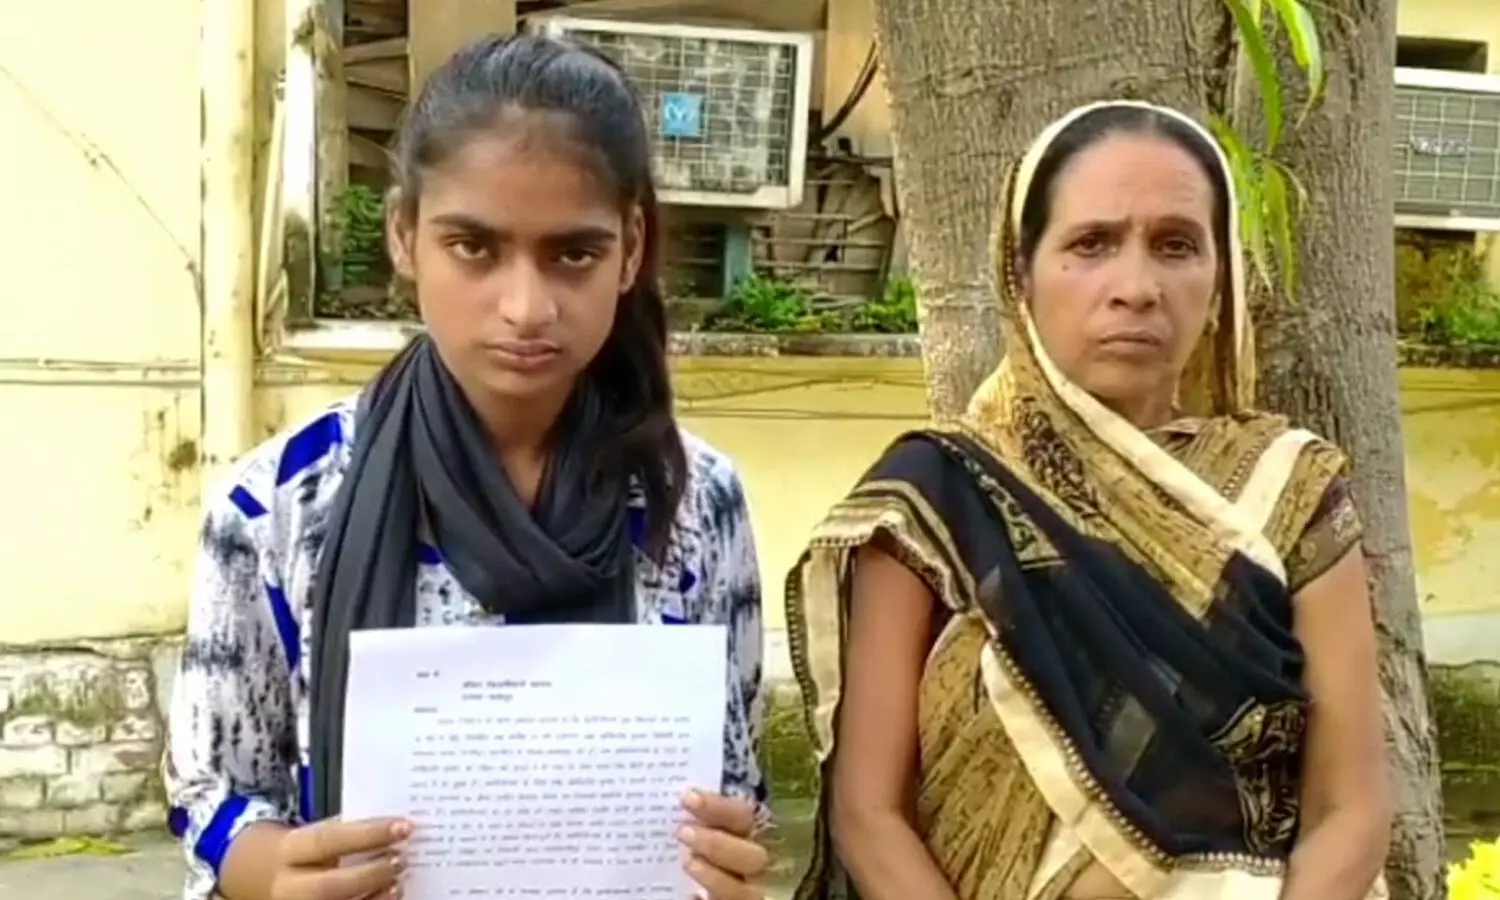 Dabangs occupied farm and house, orphan girls pleaded for justice at DMs doorstep